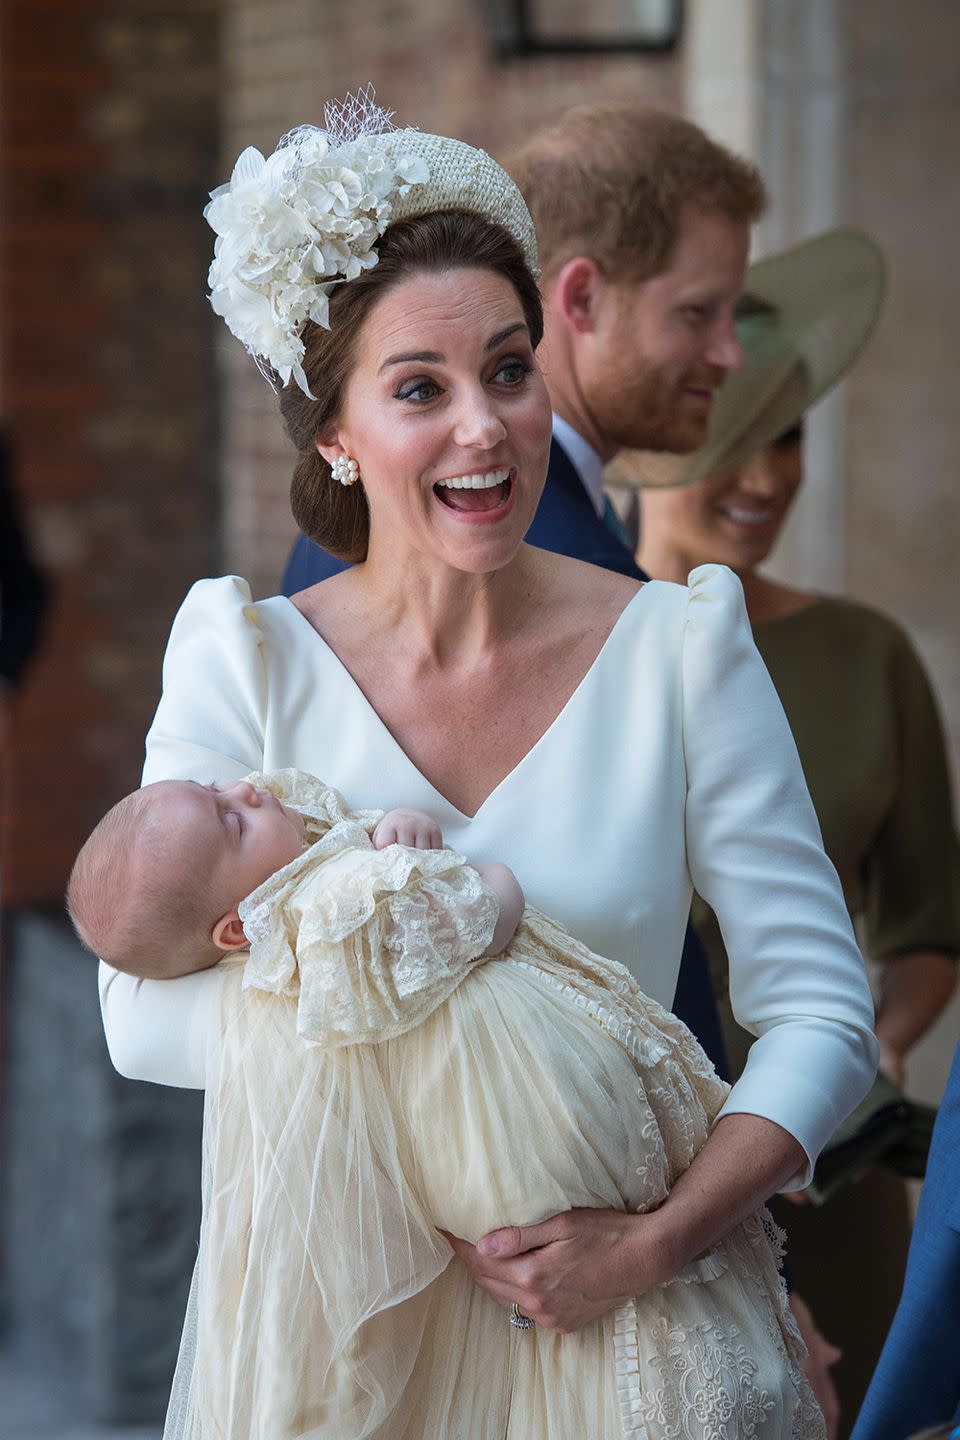 13) The baby wears a special christening gown